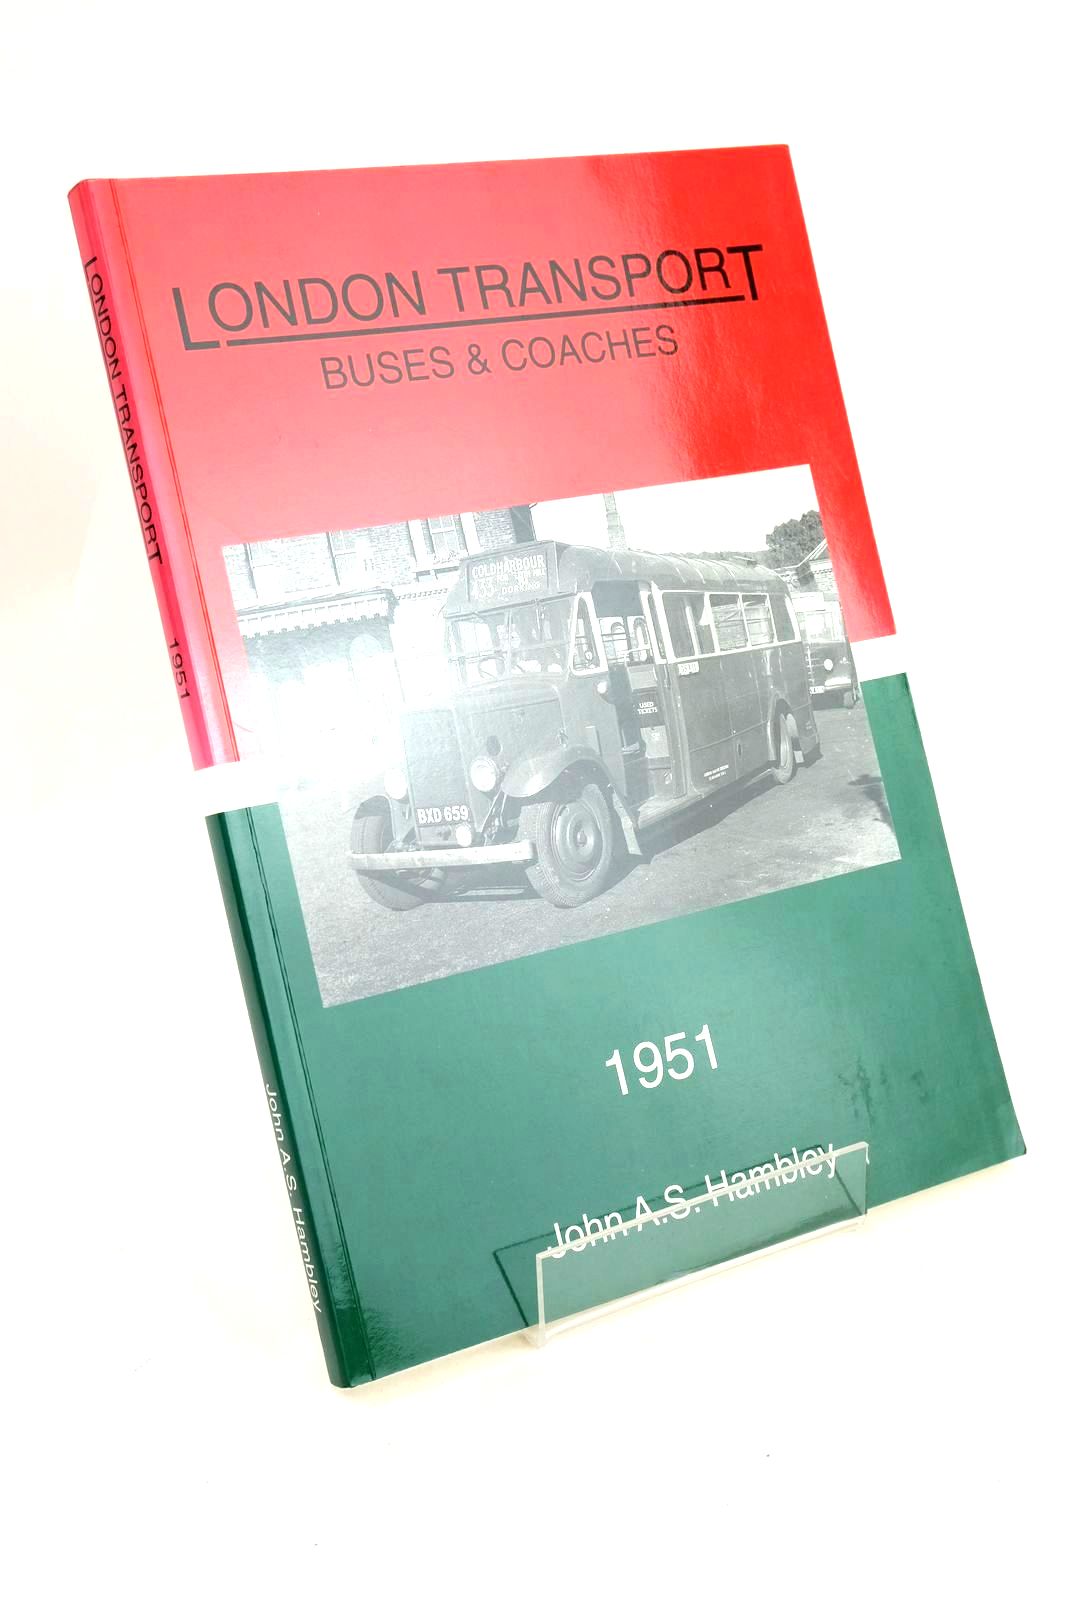 Photo of LONDON TRANSPORT BUSES & COACHES 1951- Stock Number: 1327385